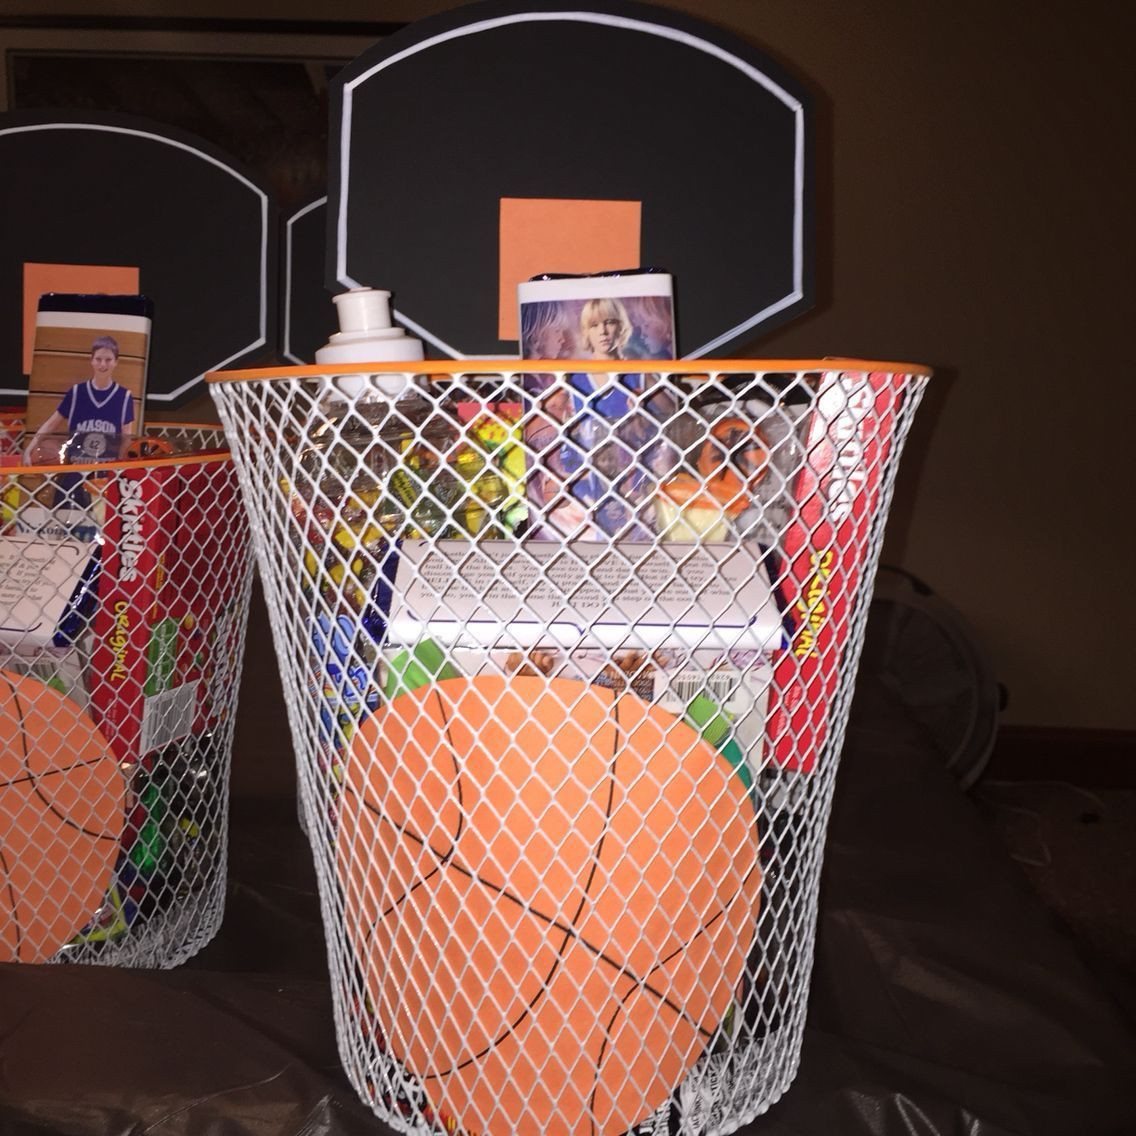 Girls Basketball Gift Ideas
 Fun Sports Easter Basket Ideas for boys and girls